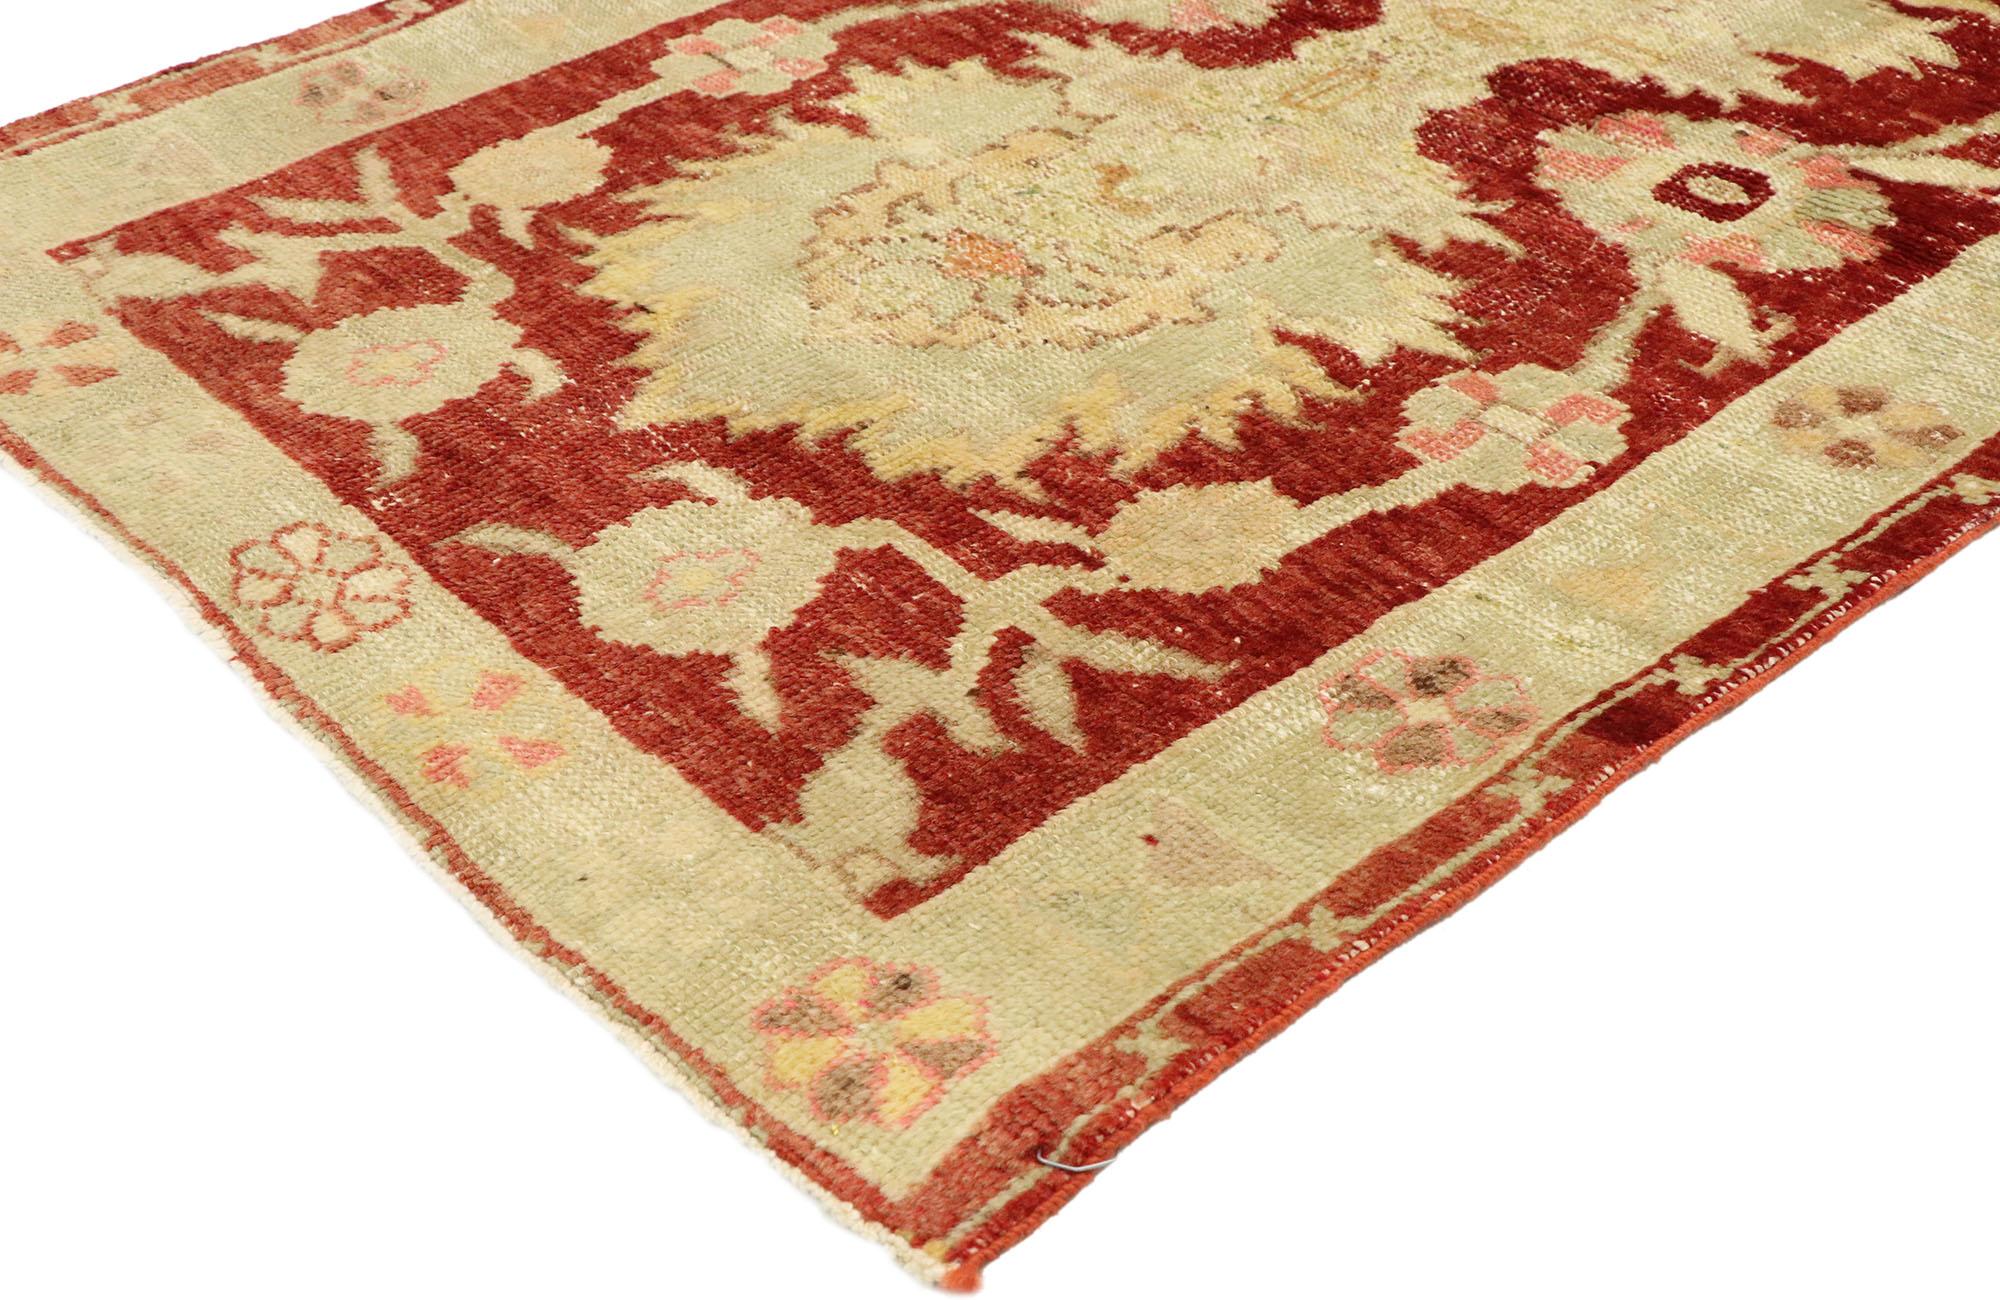 51567 Distressed Vintage Turkish Oushak Accent Rug, Entry or Foyer Rug. This hand-knotted wool distressed vintage Turkish Oushak rug features a modern traditional style. Immersed in Anatolian history and refined colors, this vintage Oushak rug